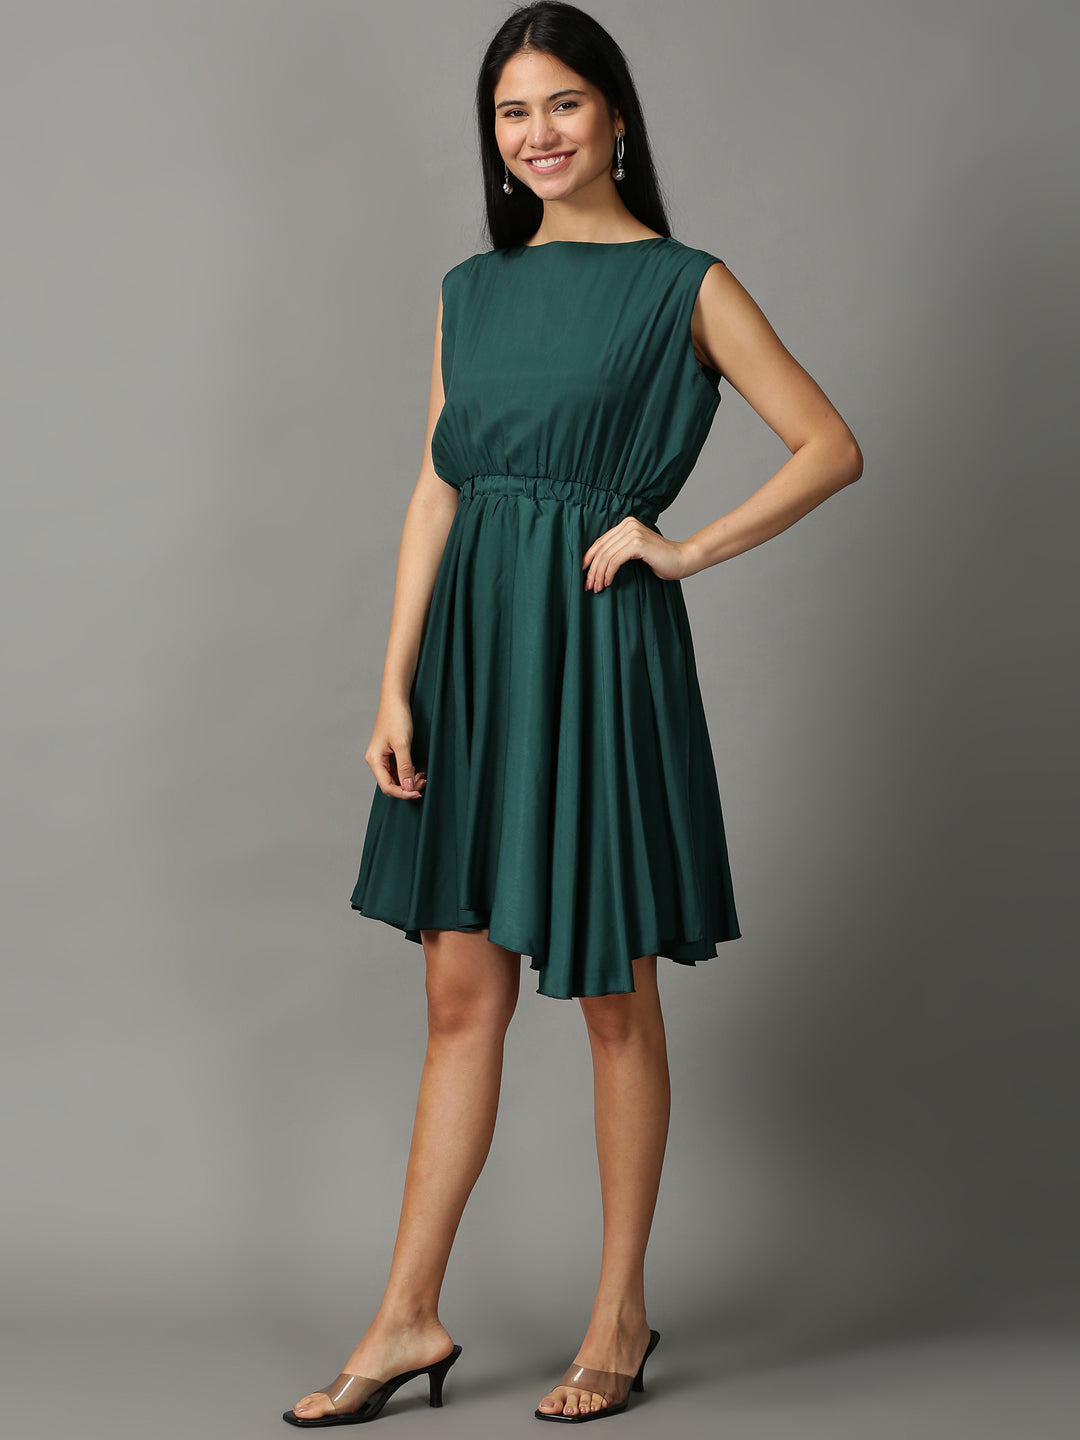 Women's Green Solid Fit and Flare Dress